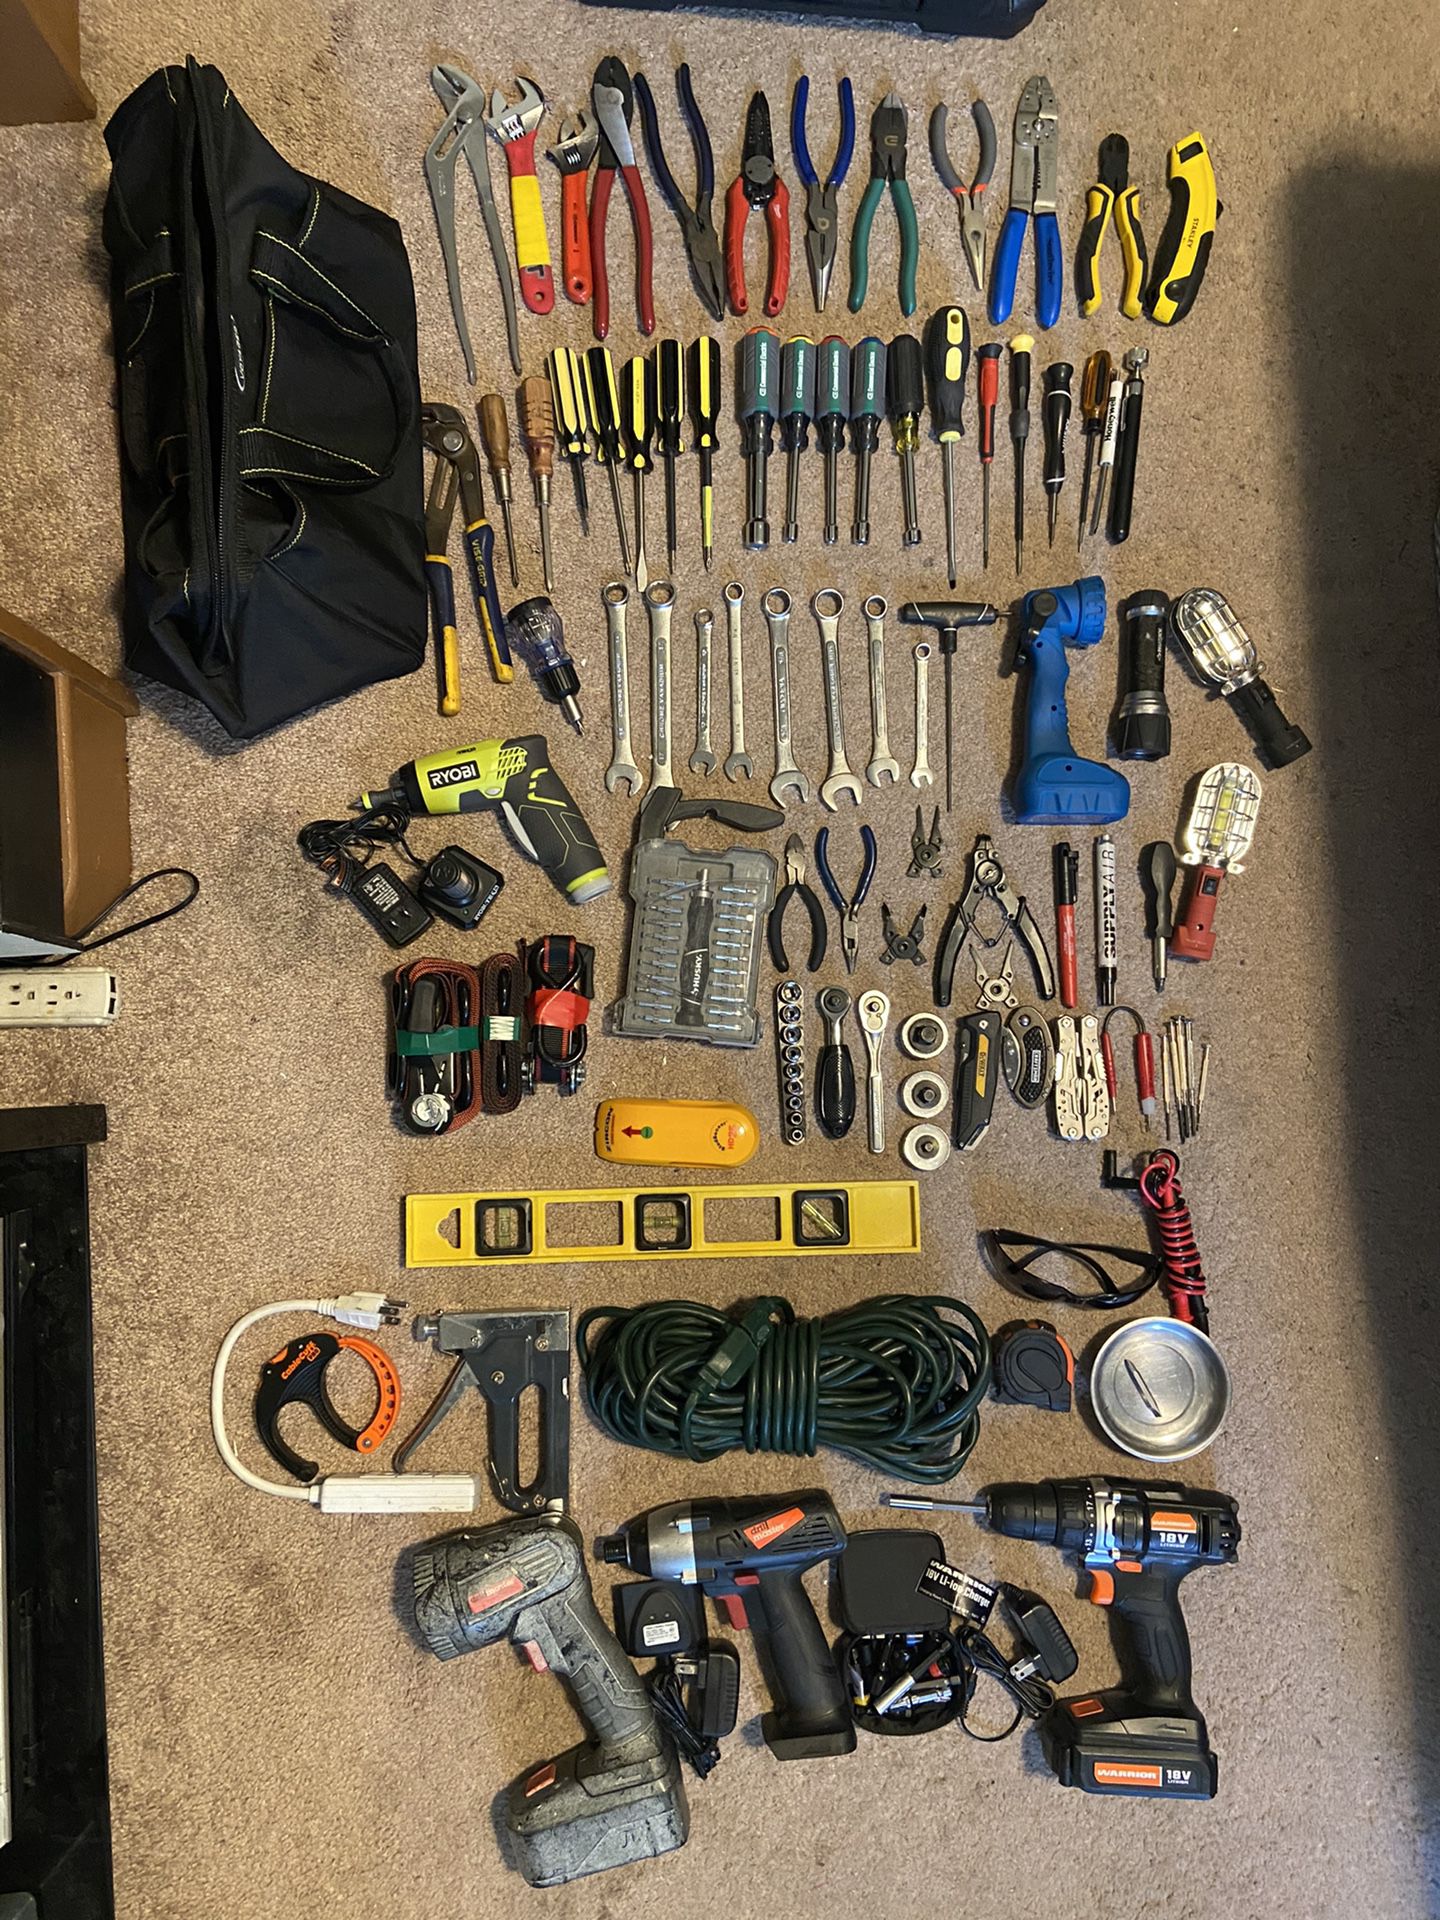 Hand Tools, Power Tools, Equipment, and Accessories